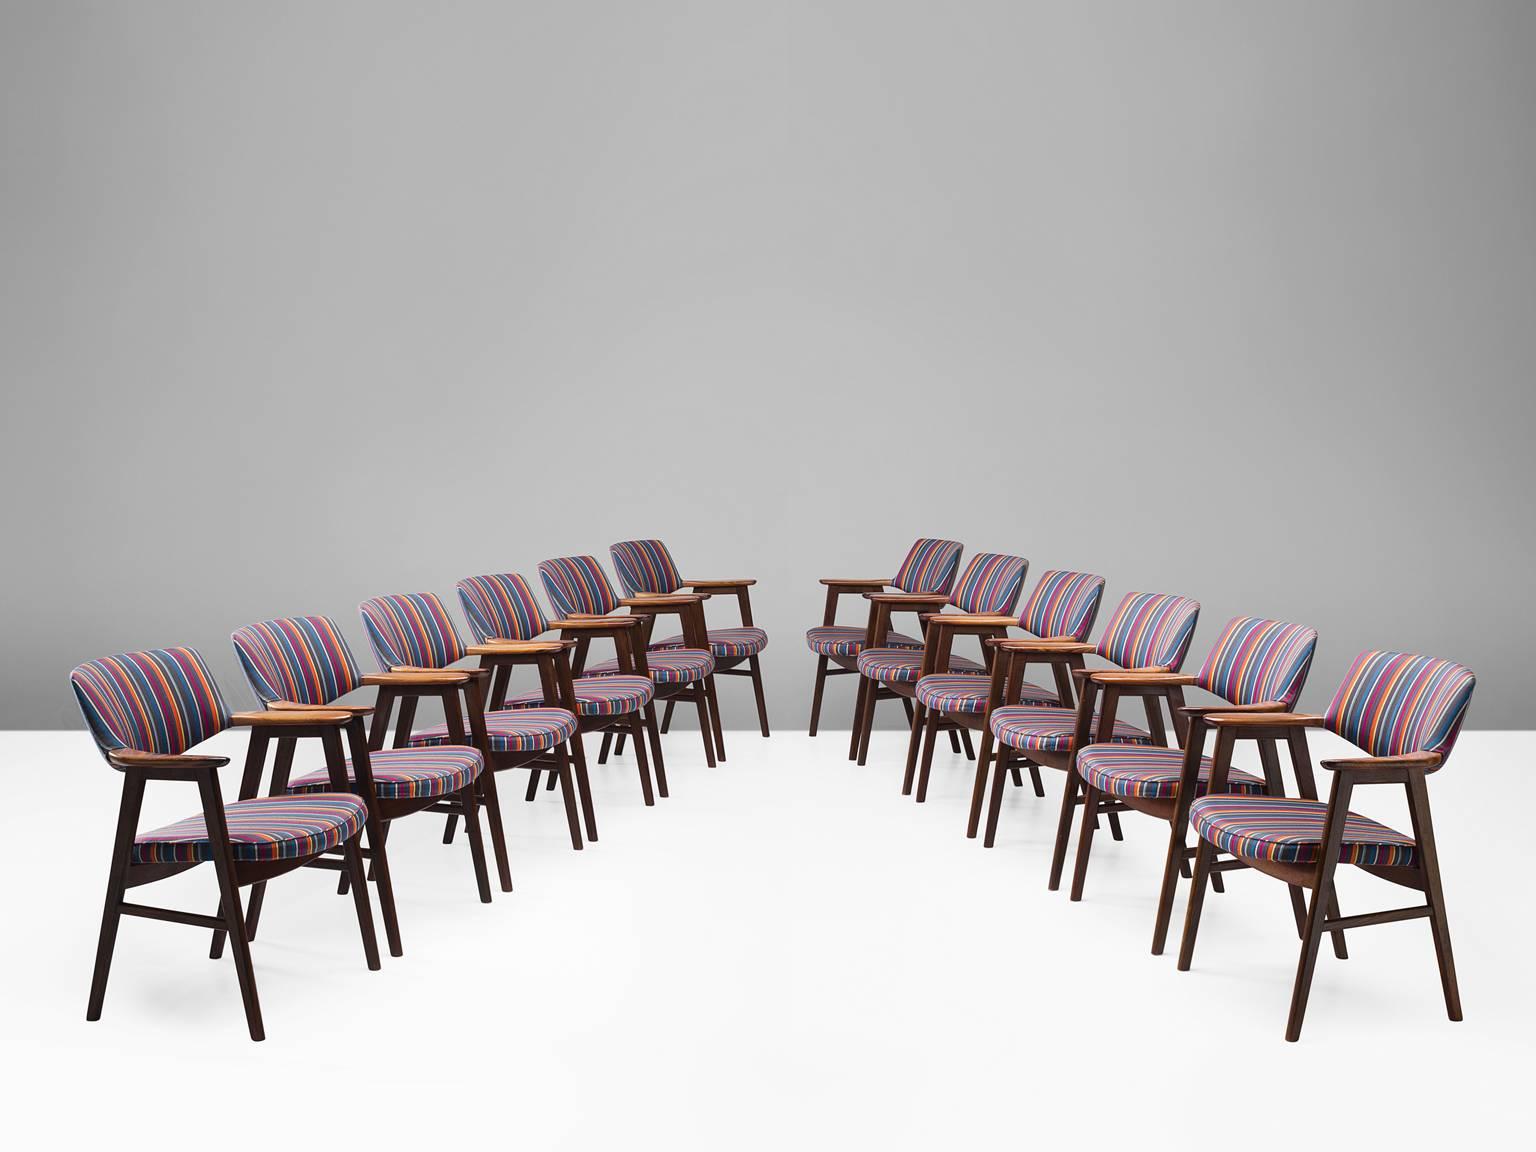 Set of 12 armchairs, in rosewood, Denmark, circa 1952.

Very comfortable dining chairs, due to well-shaped armrests and ergonomic proportions of the back and seat. The sculptural back is very attractive, as the beautifully curved bottom of the back